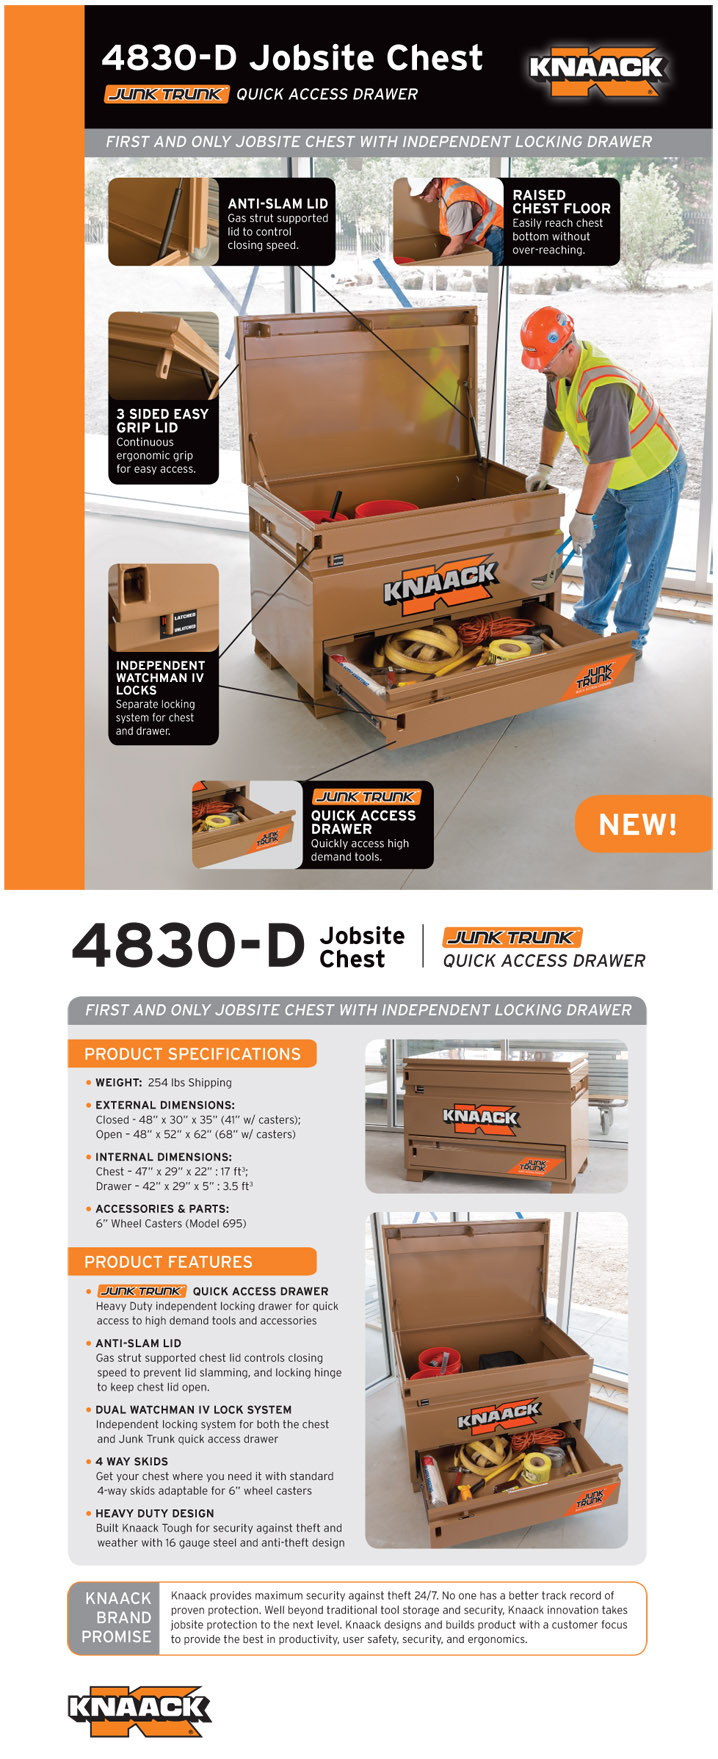 Knaack 4830-D Jobsite Chest with Quick Access Drawer